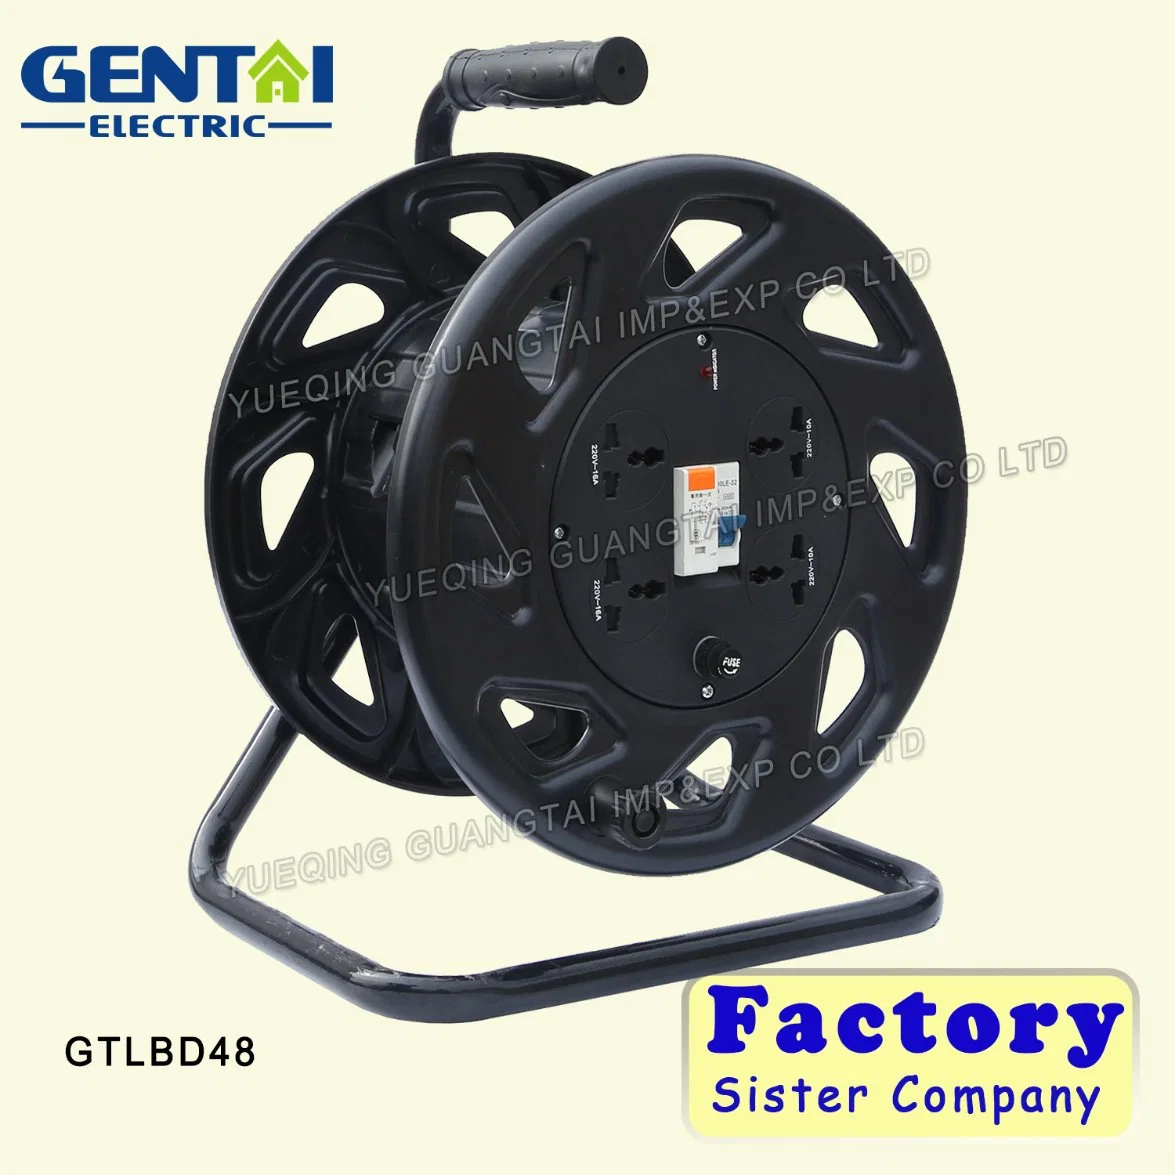 220V 16A Universal Sockets Drum Cord Reel with Circuit Breaker